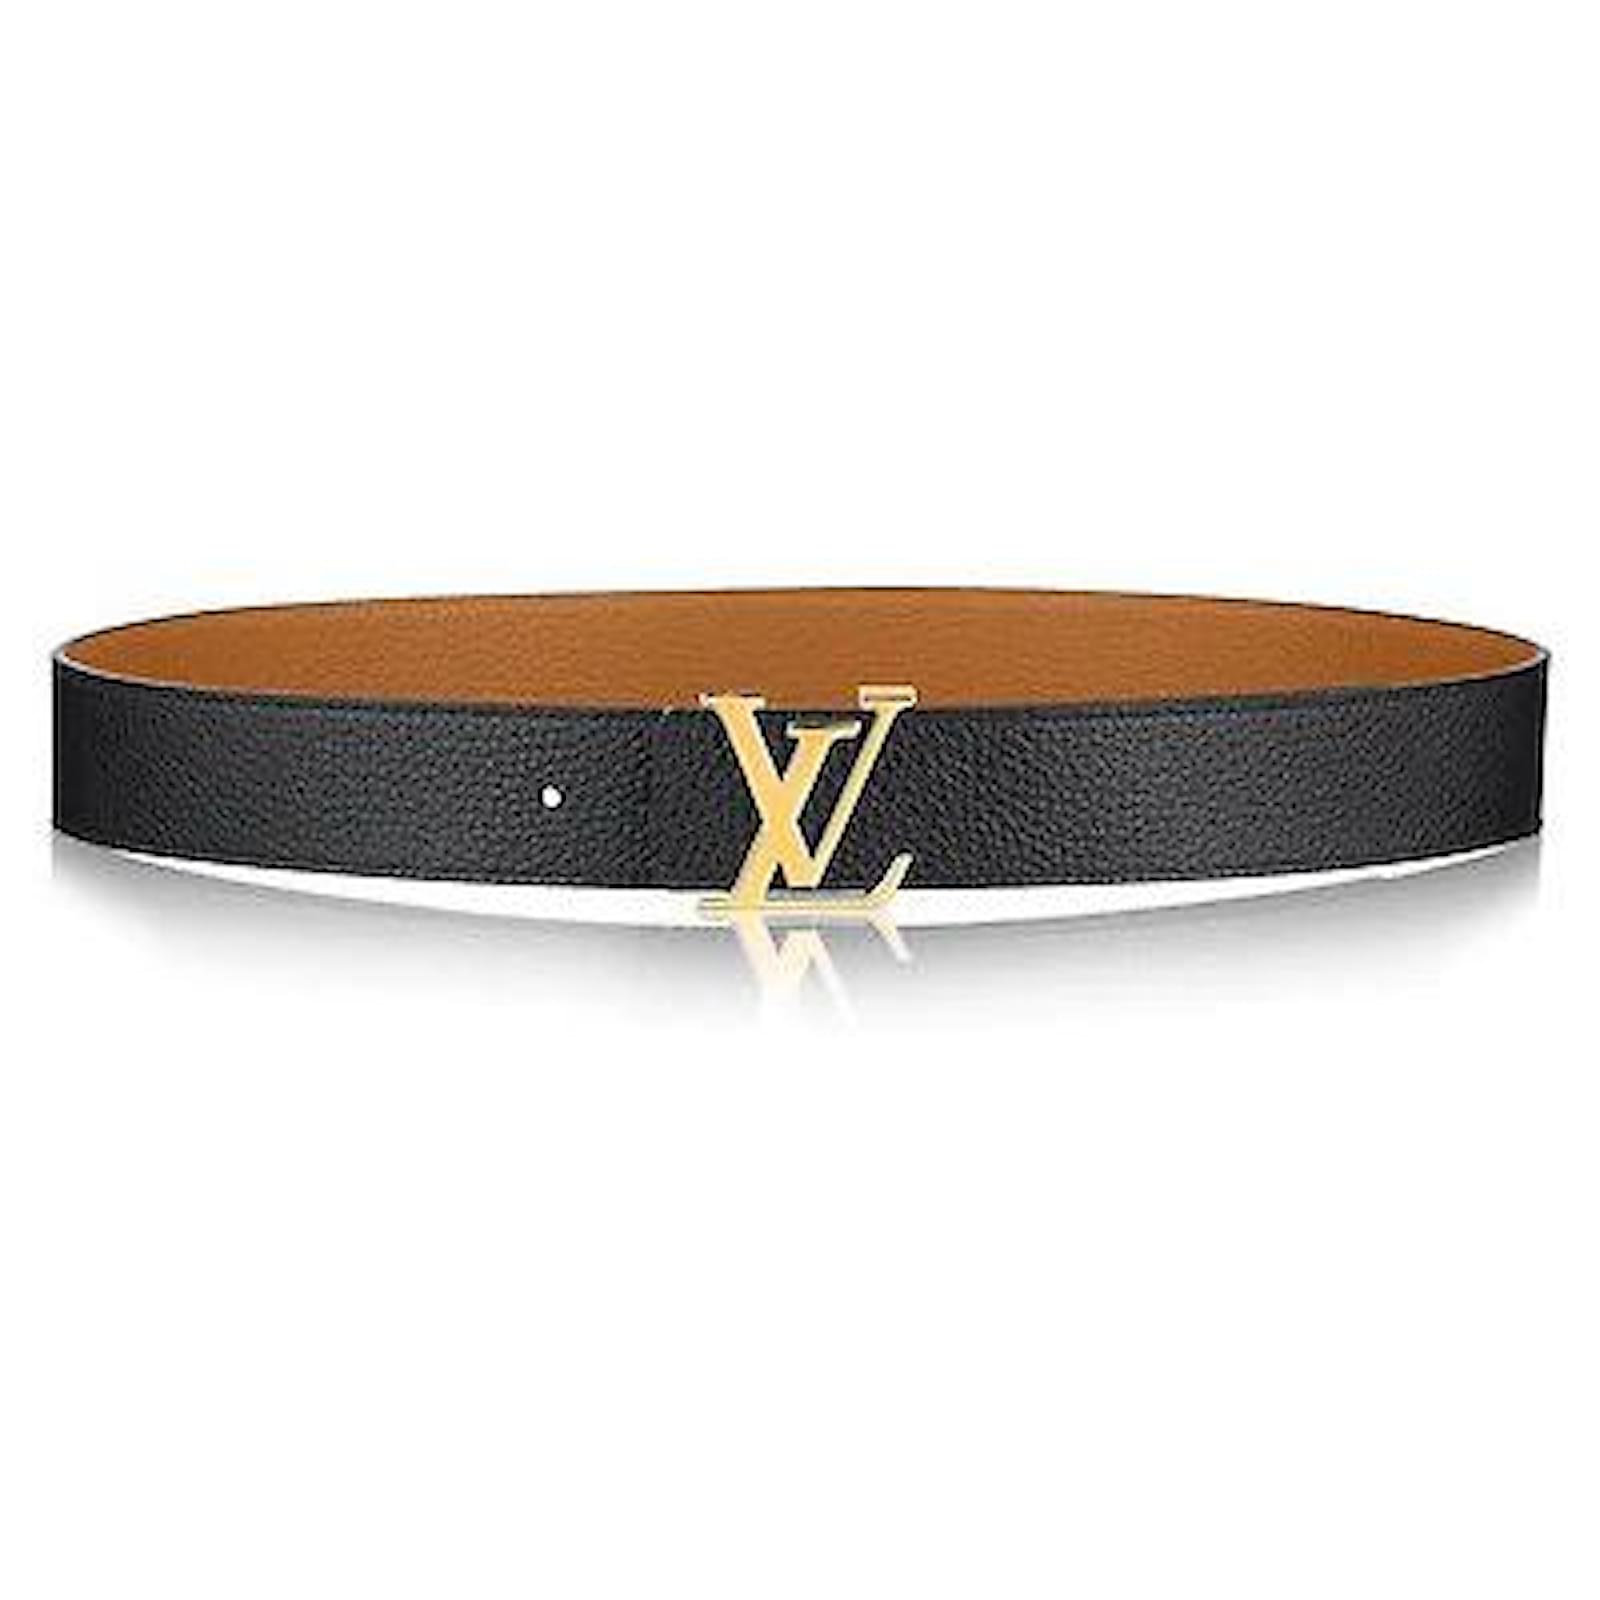 New W/Box Limited Edition Louis Vuitton LV Black Leather belt